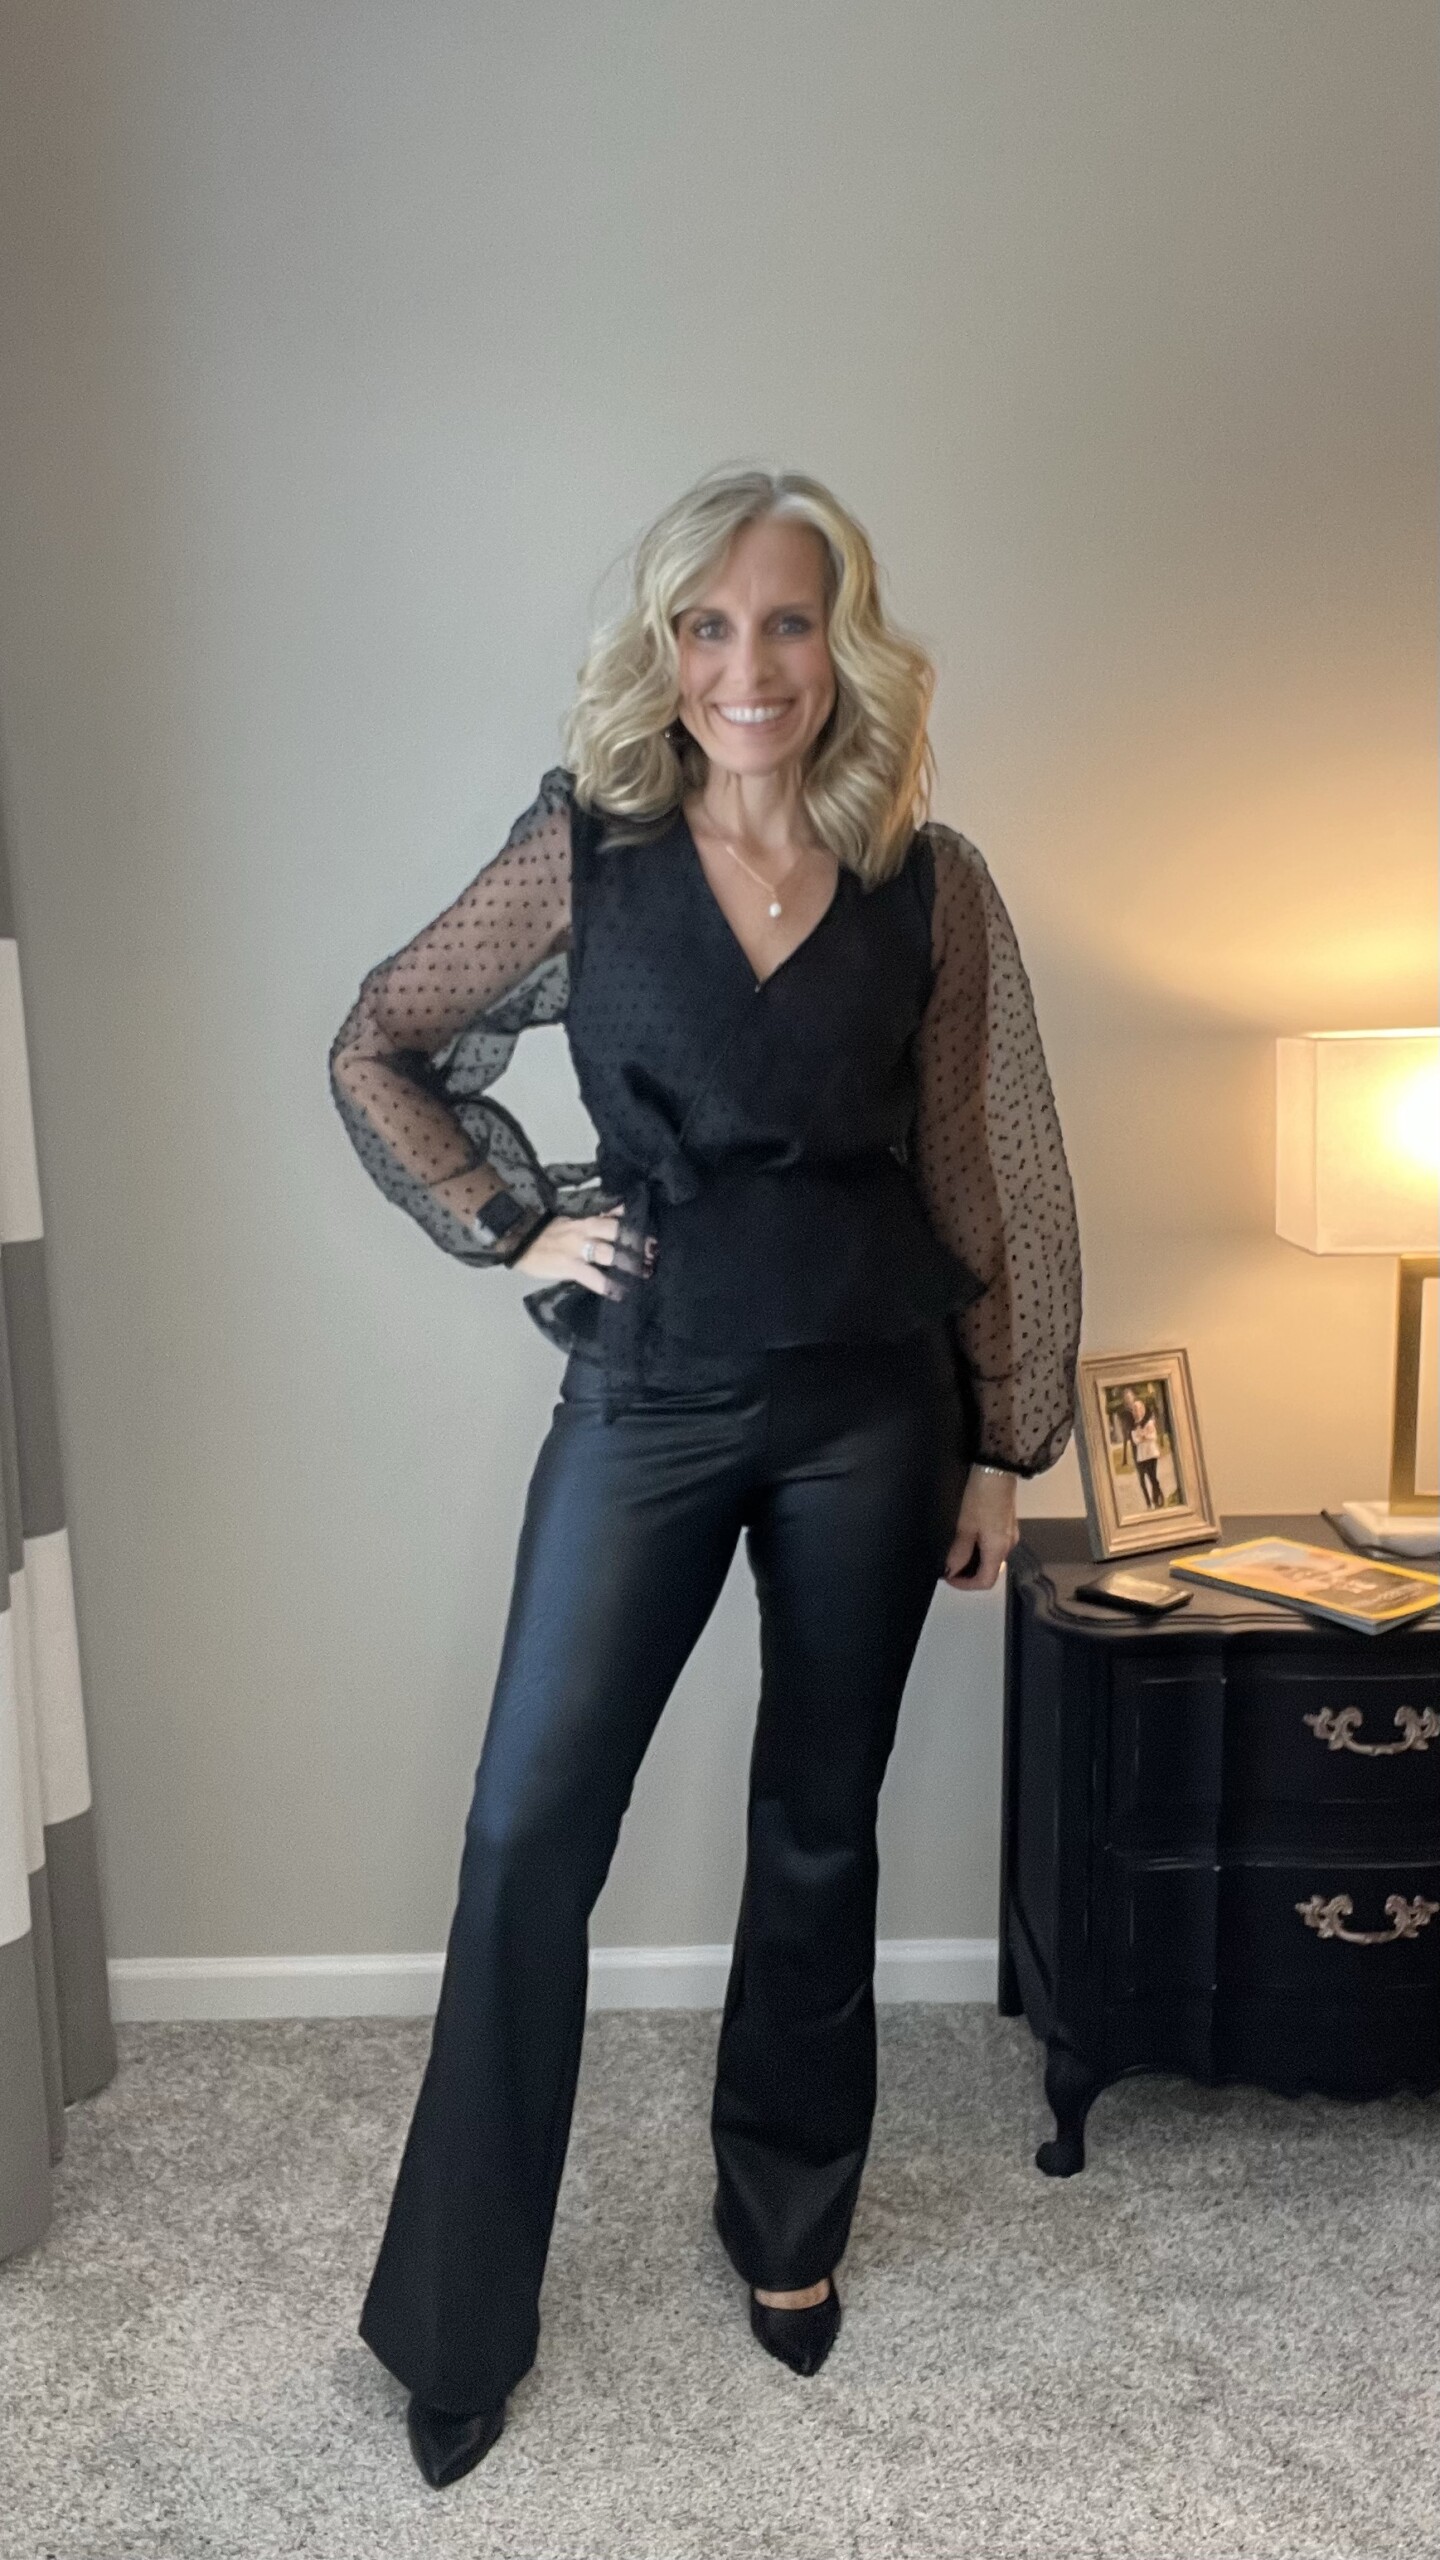 How to Wear a Black Jumpsuit 5 Ways